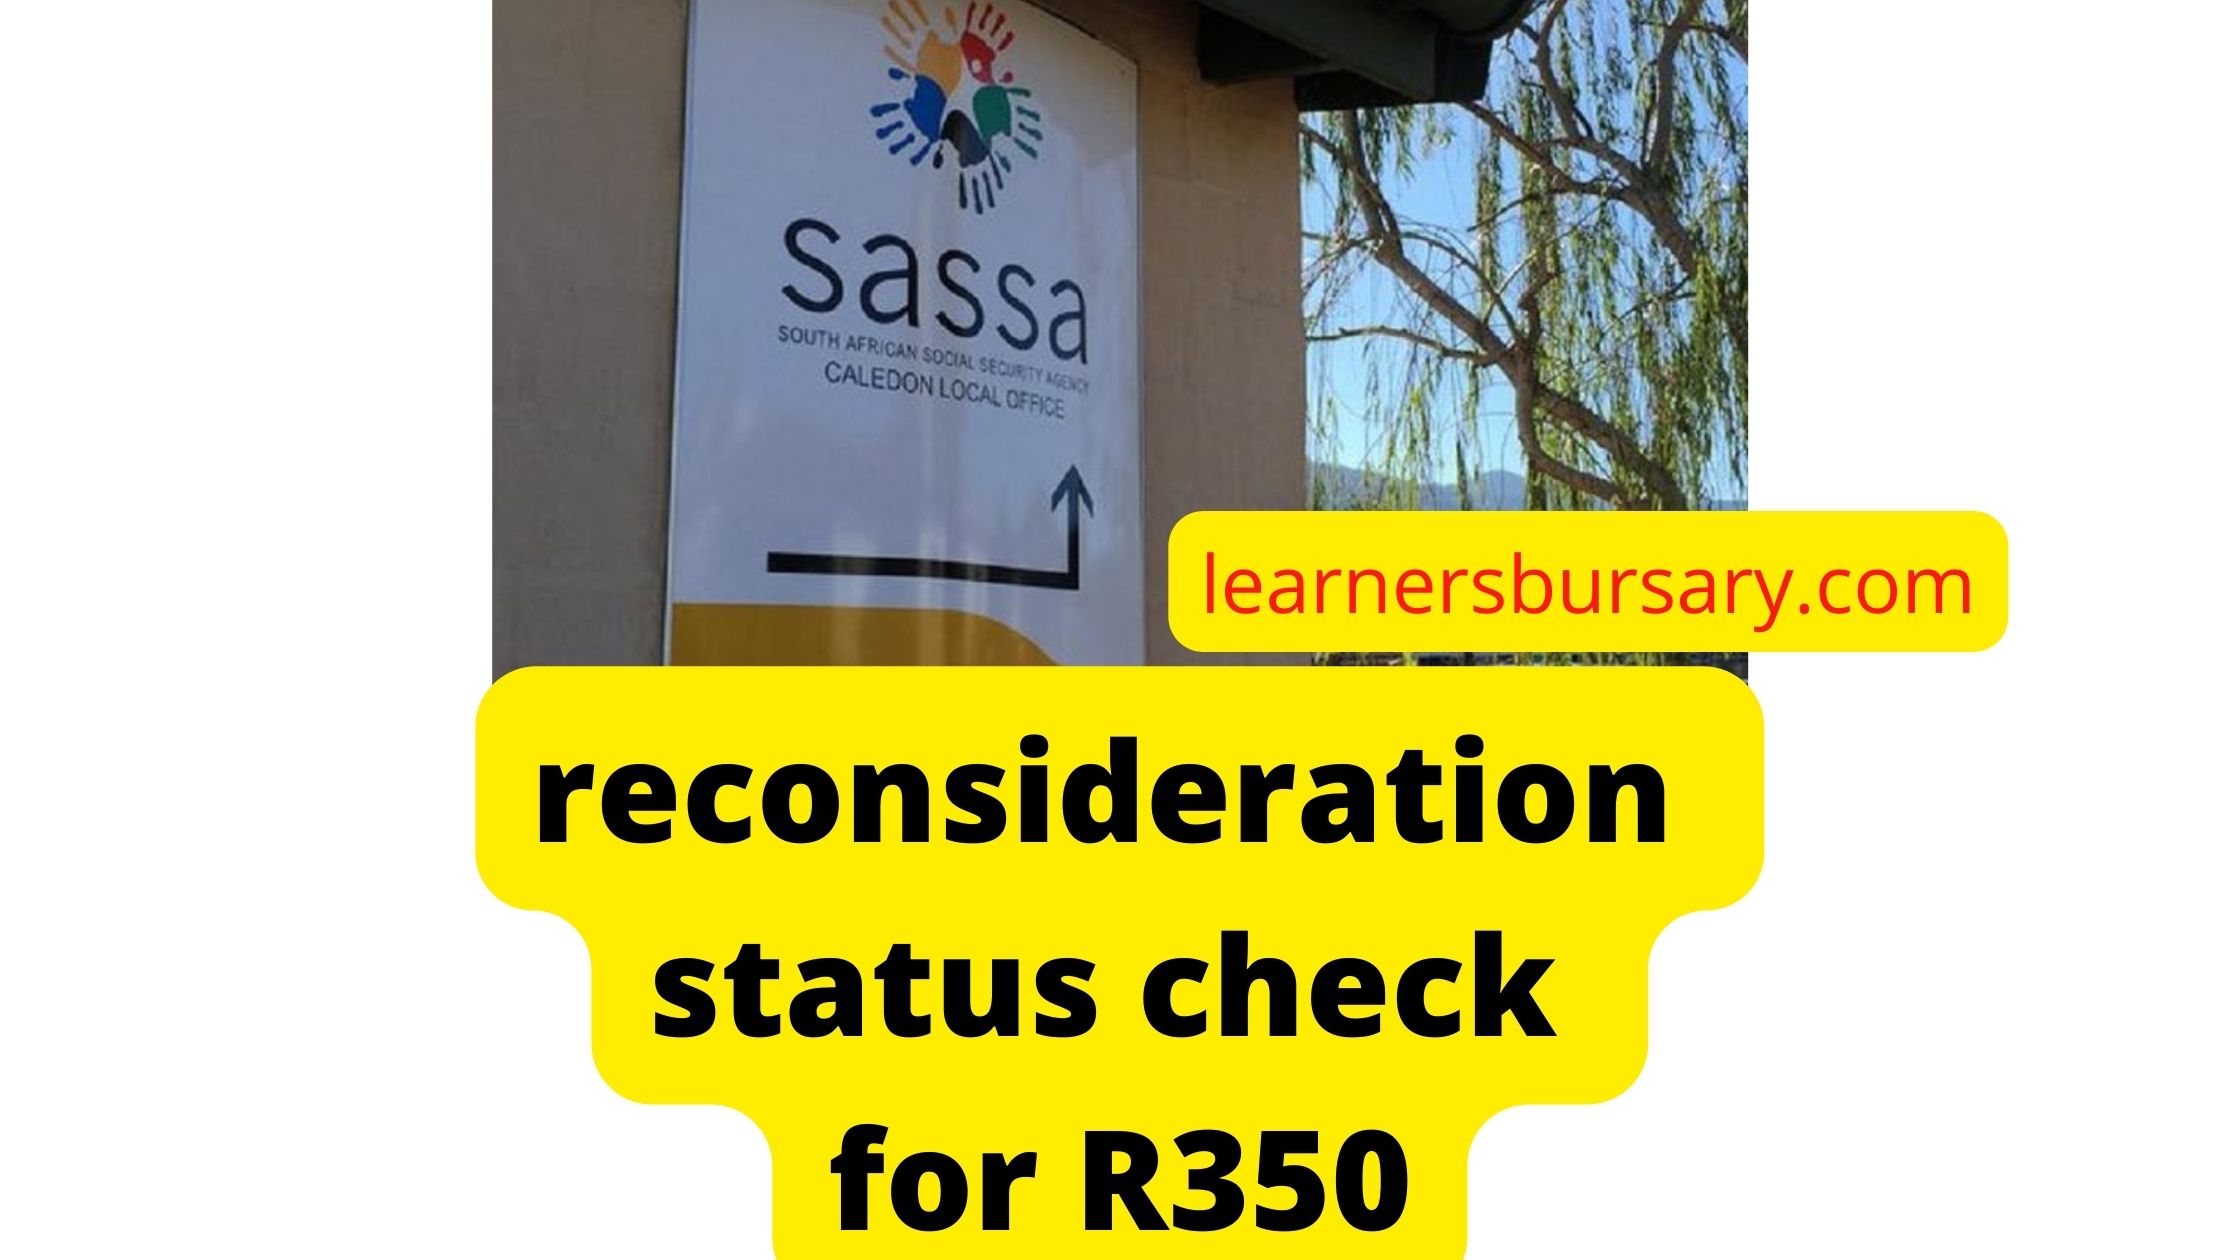 reconsideration status check for R350